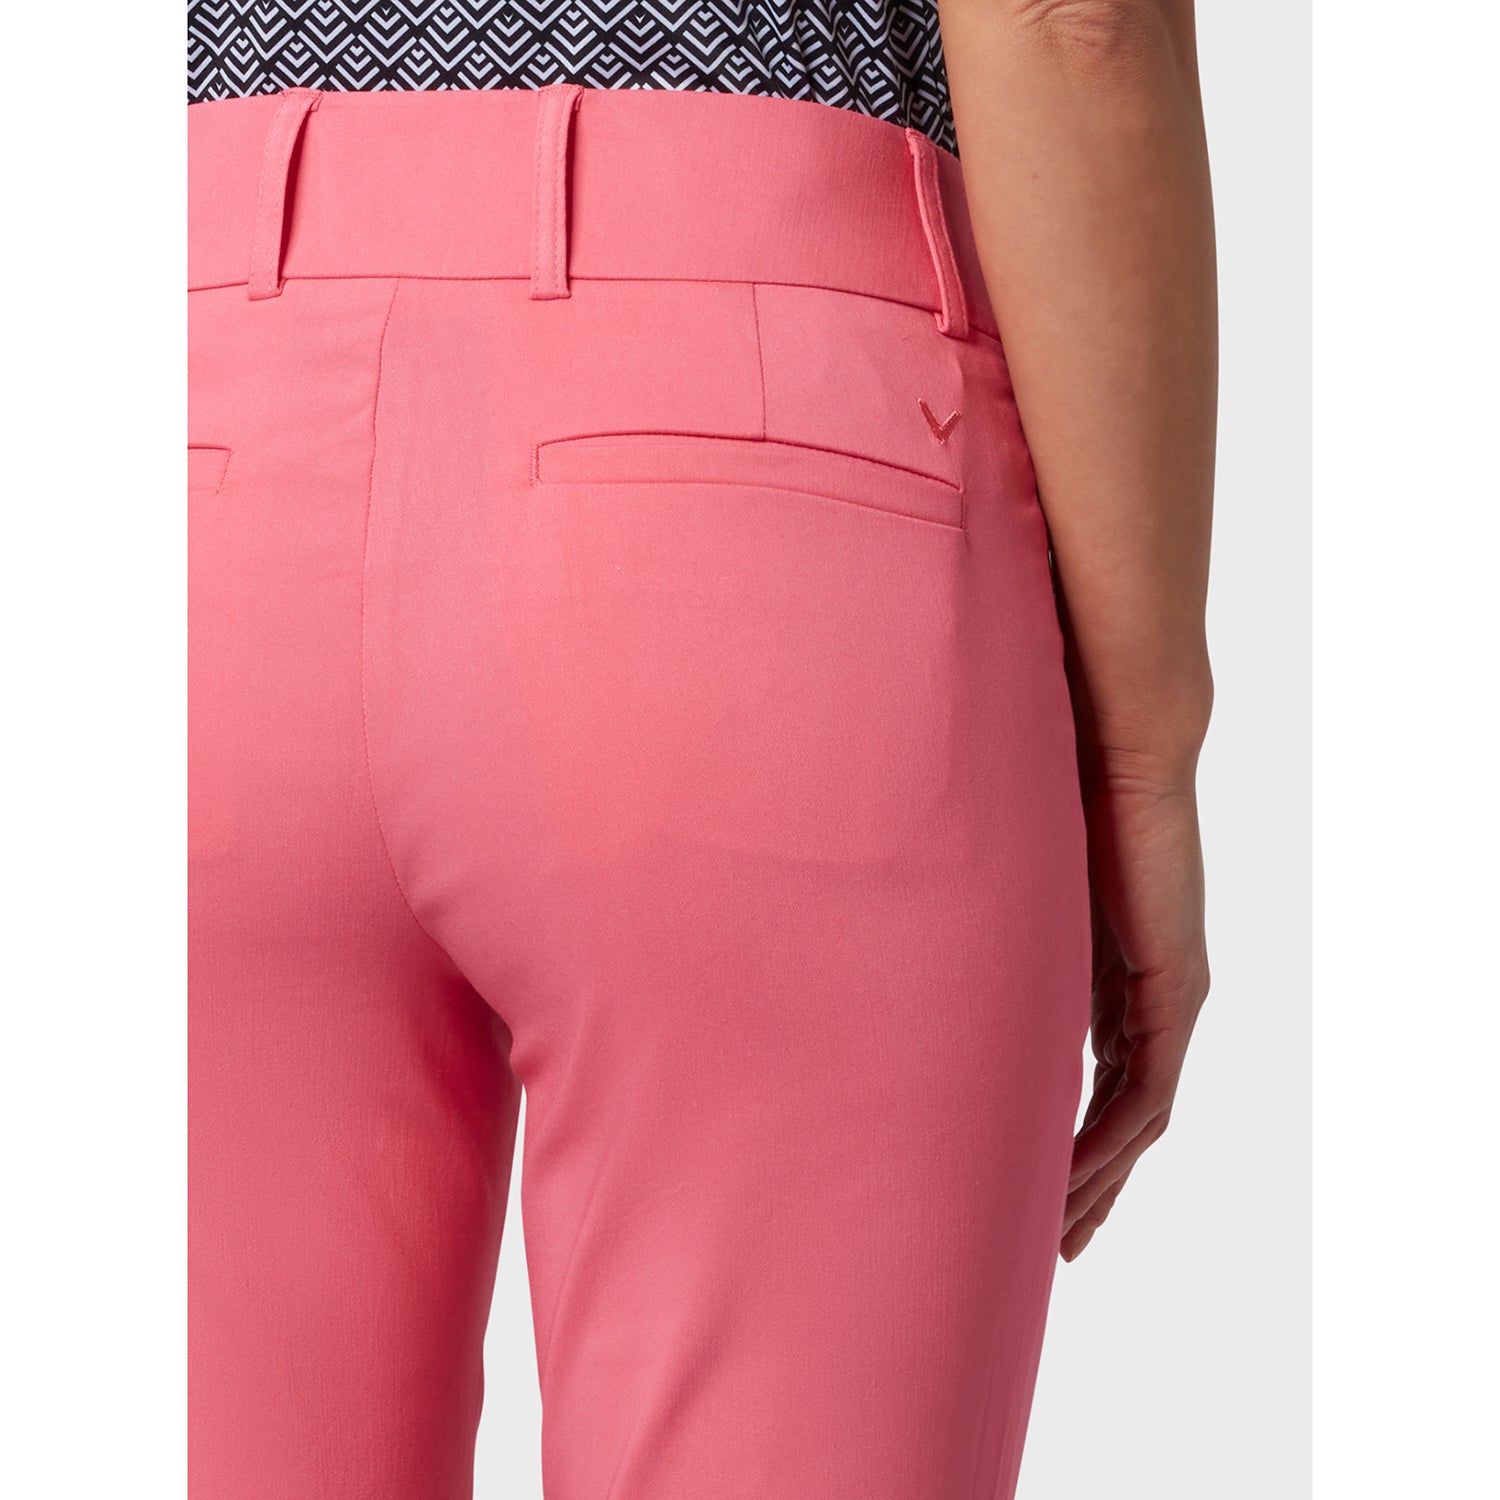 Callaway Ladies Pull on Stretch Trousers Caviar